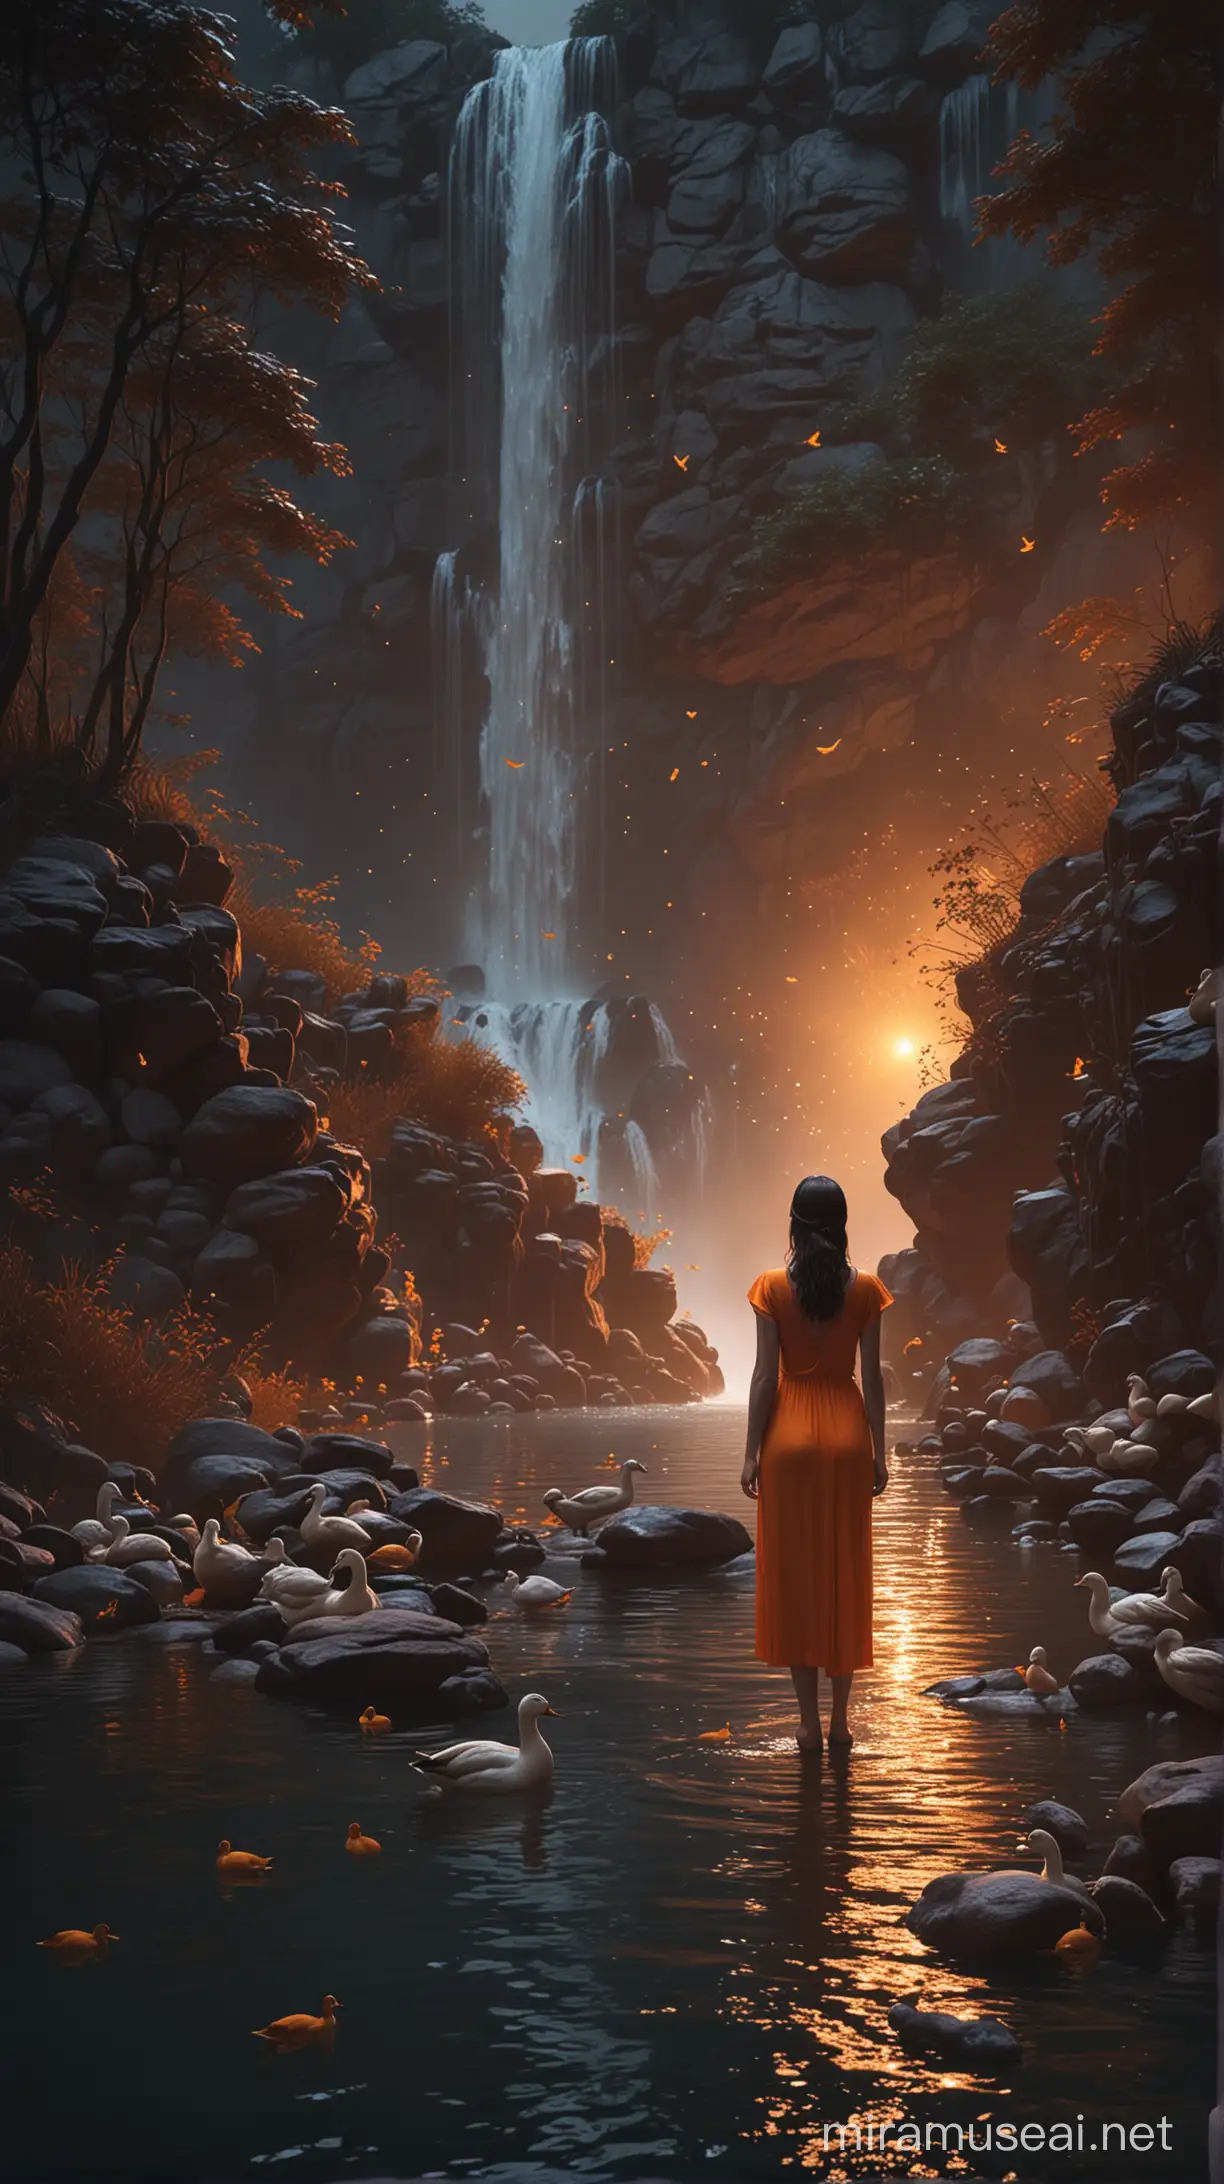 3D 8k mininal realistic illustrator mininal woman beside the water fall with ducks shinning and glittering at the midnight with her orange light dress